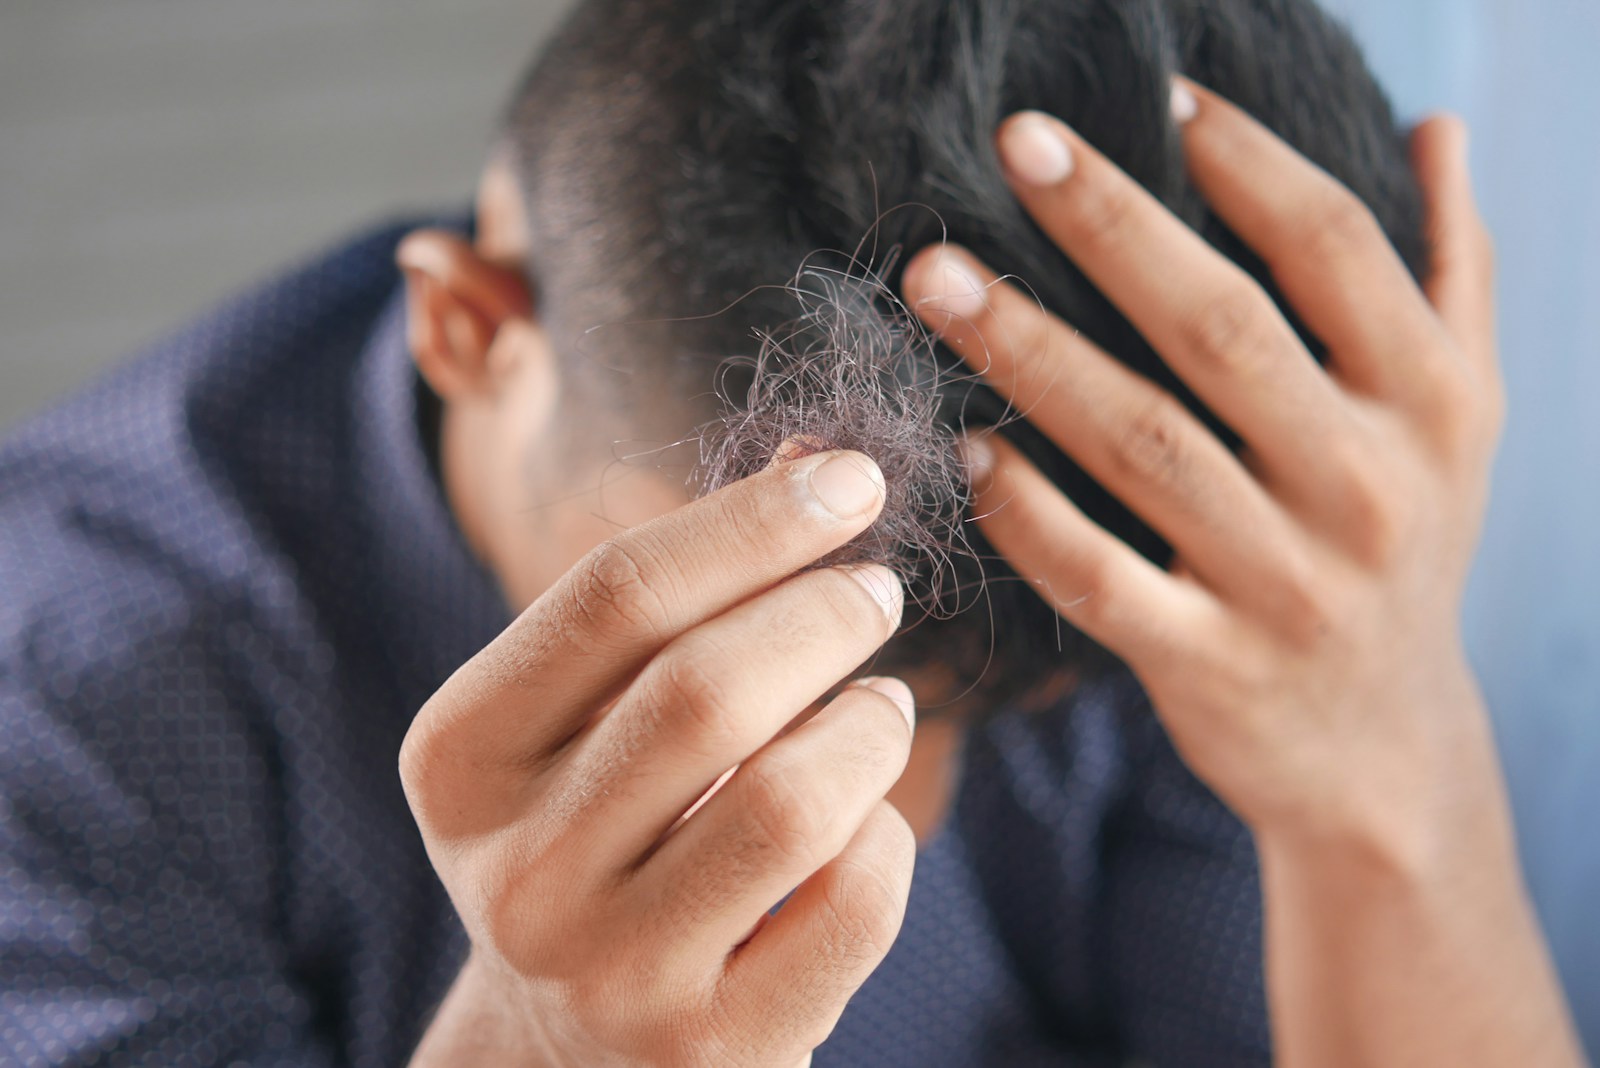 6 Ways To Stop Hair Loss In It’s Tracks